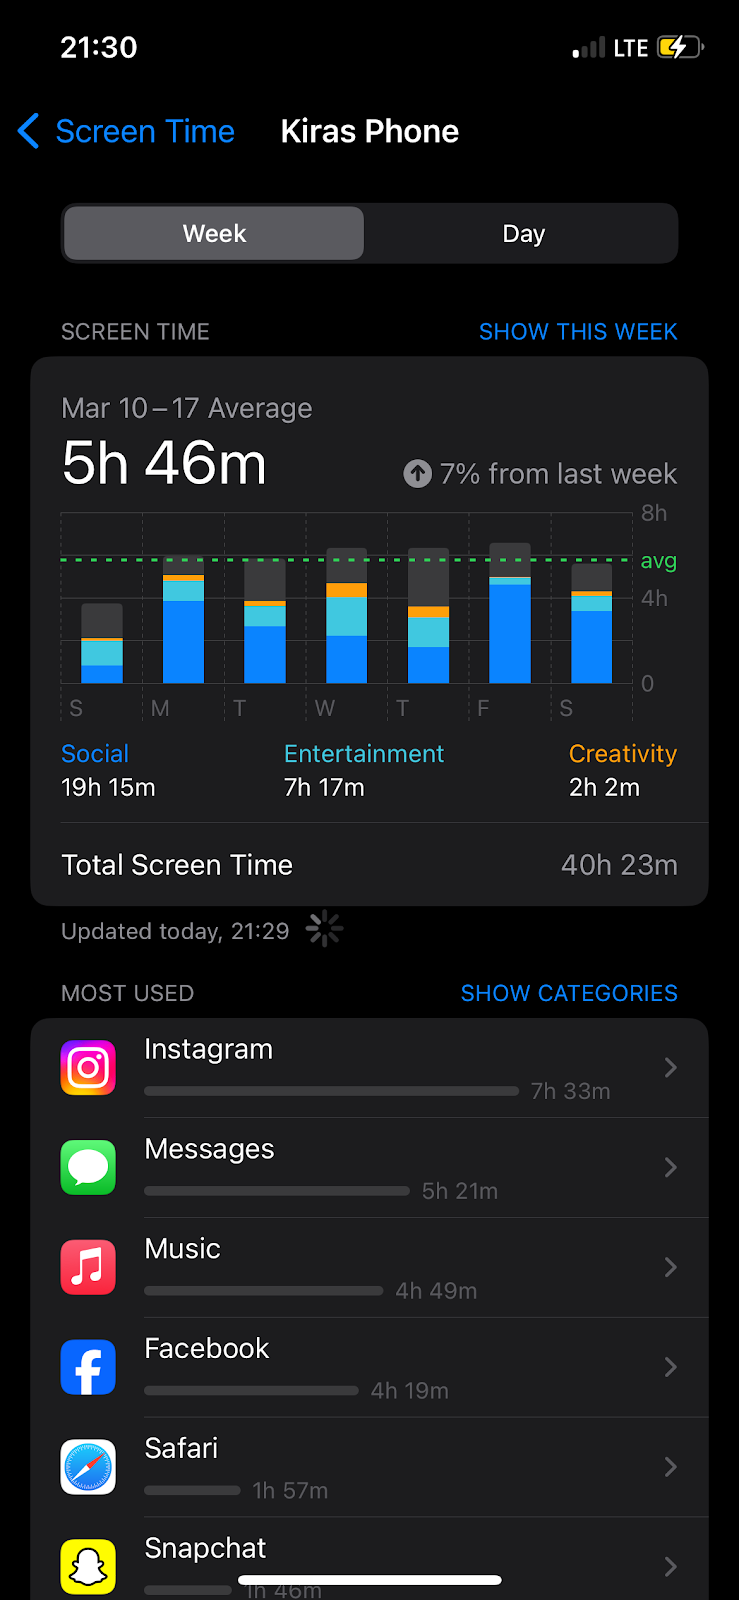 Screenshot of Kira's weekly screentime showing 7 hours and 33 minutes for Instagram